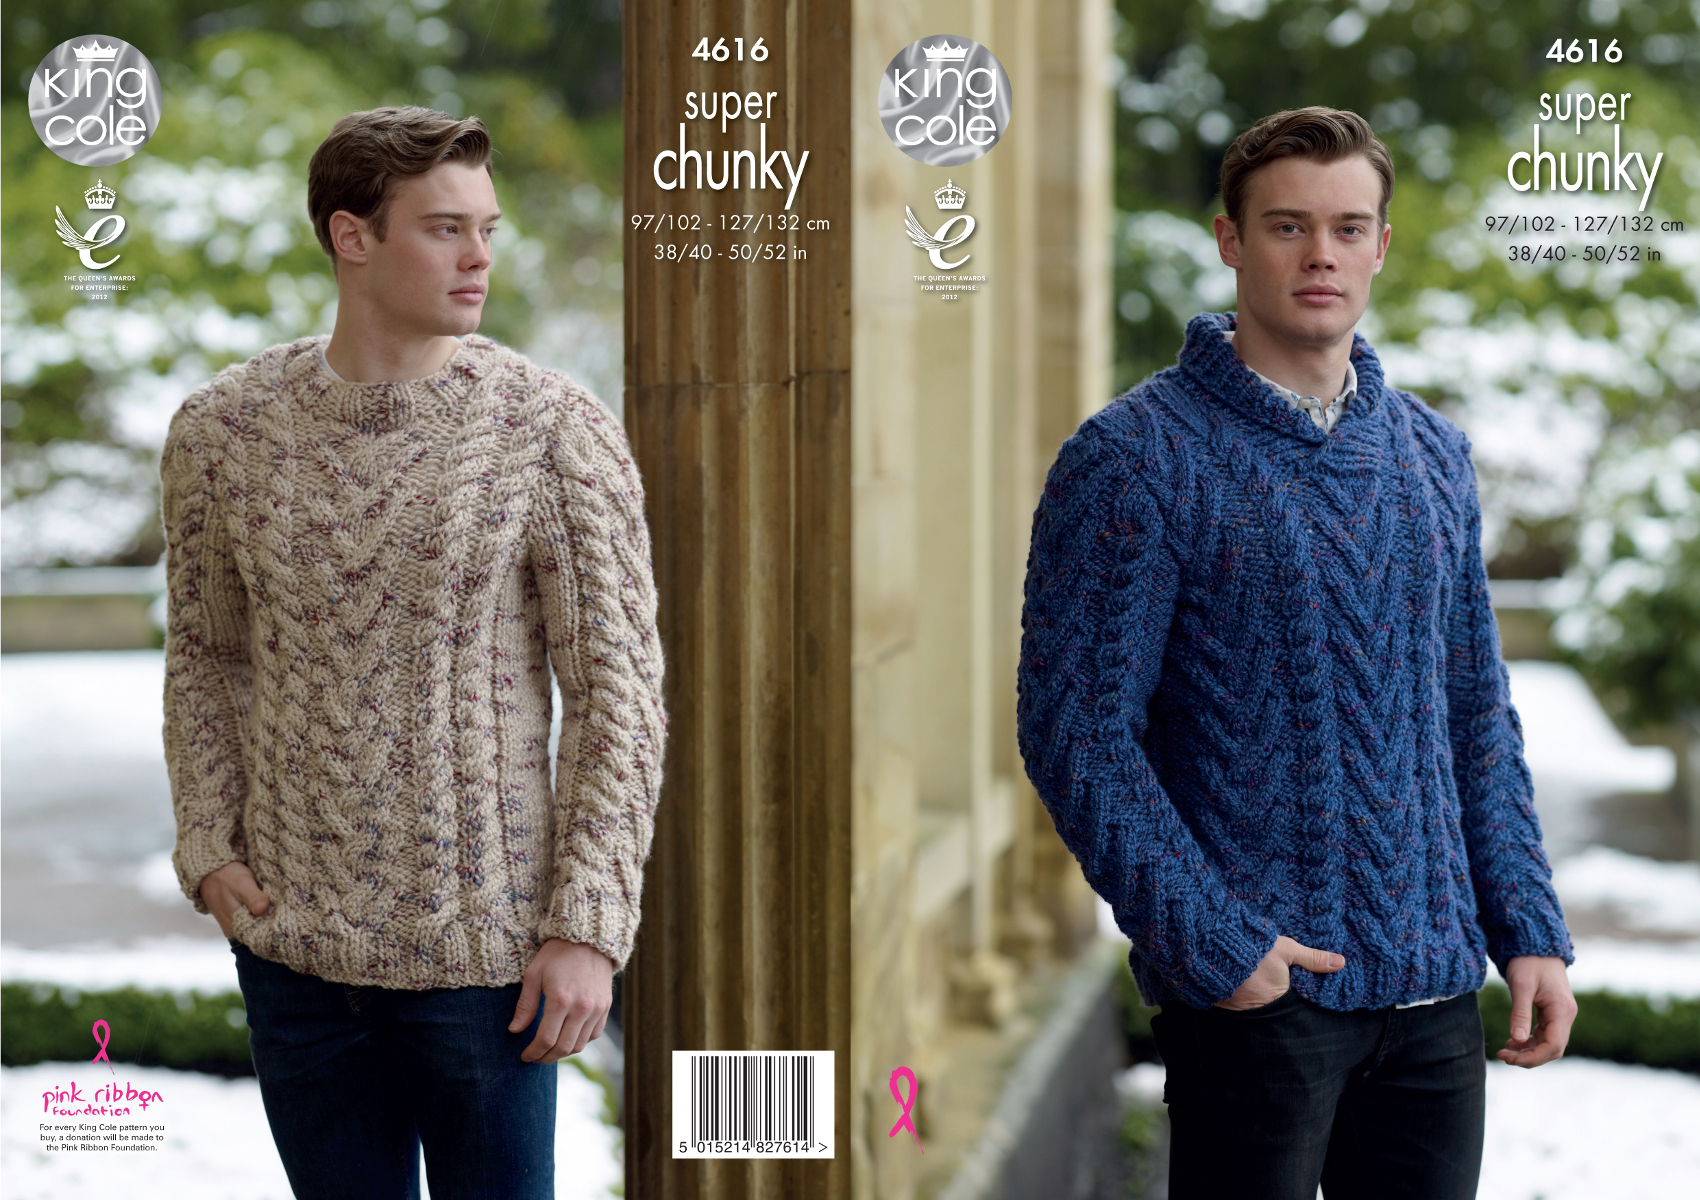 Mens Knit Patterns Details About King Cole Mens Super Chunky Knitting Pattern Round Neck Or Collar Sweater 4616